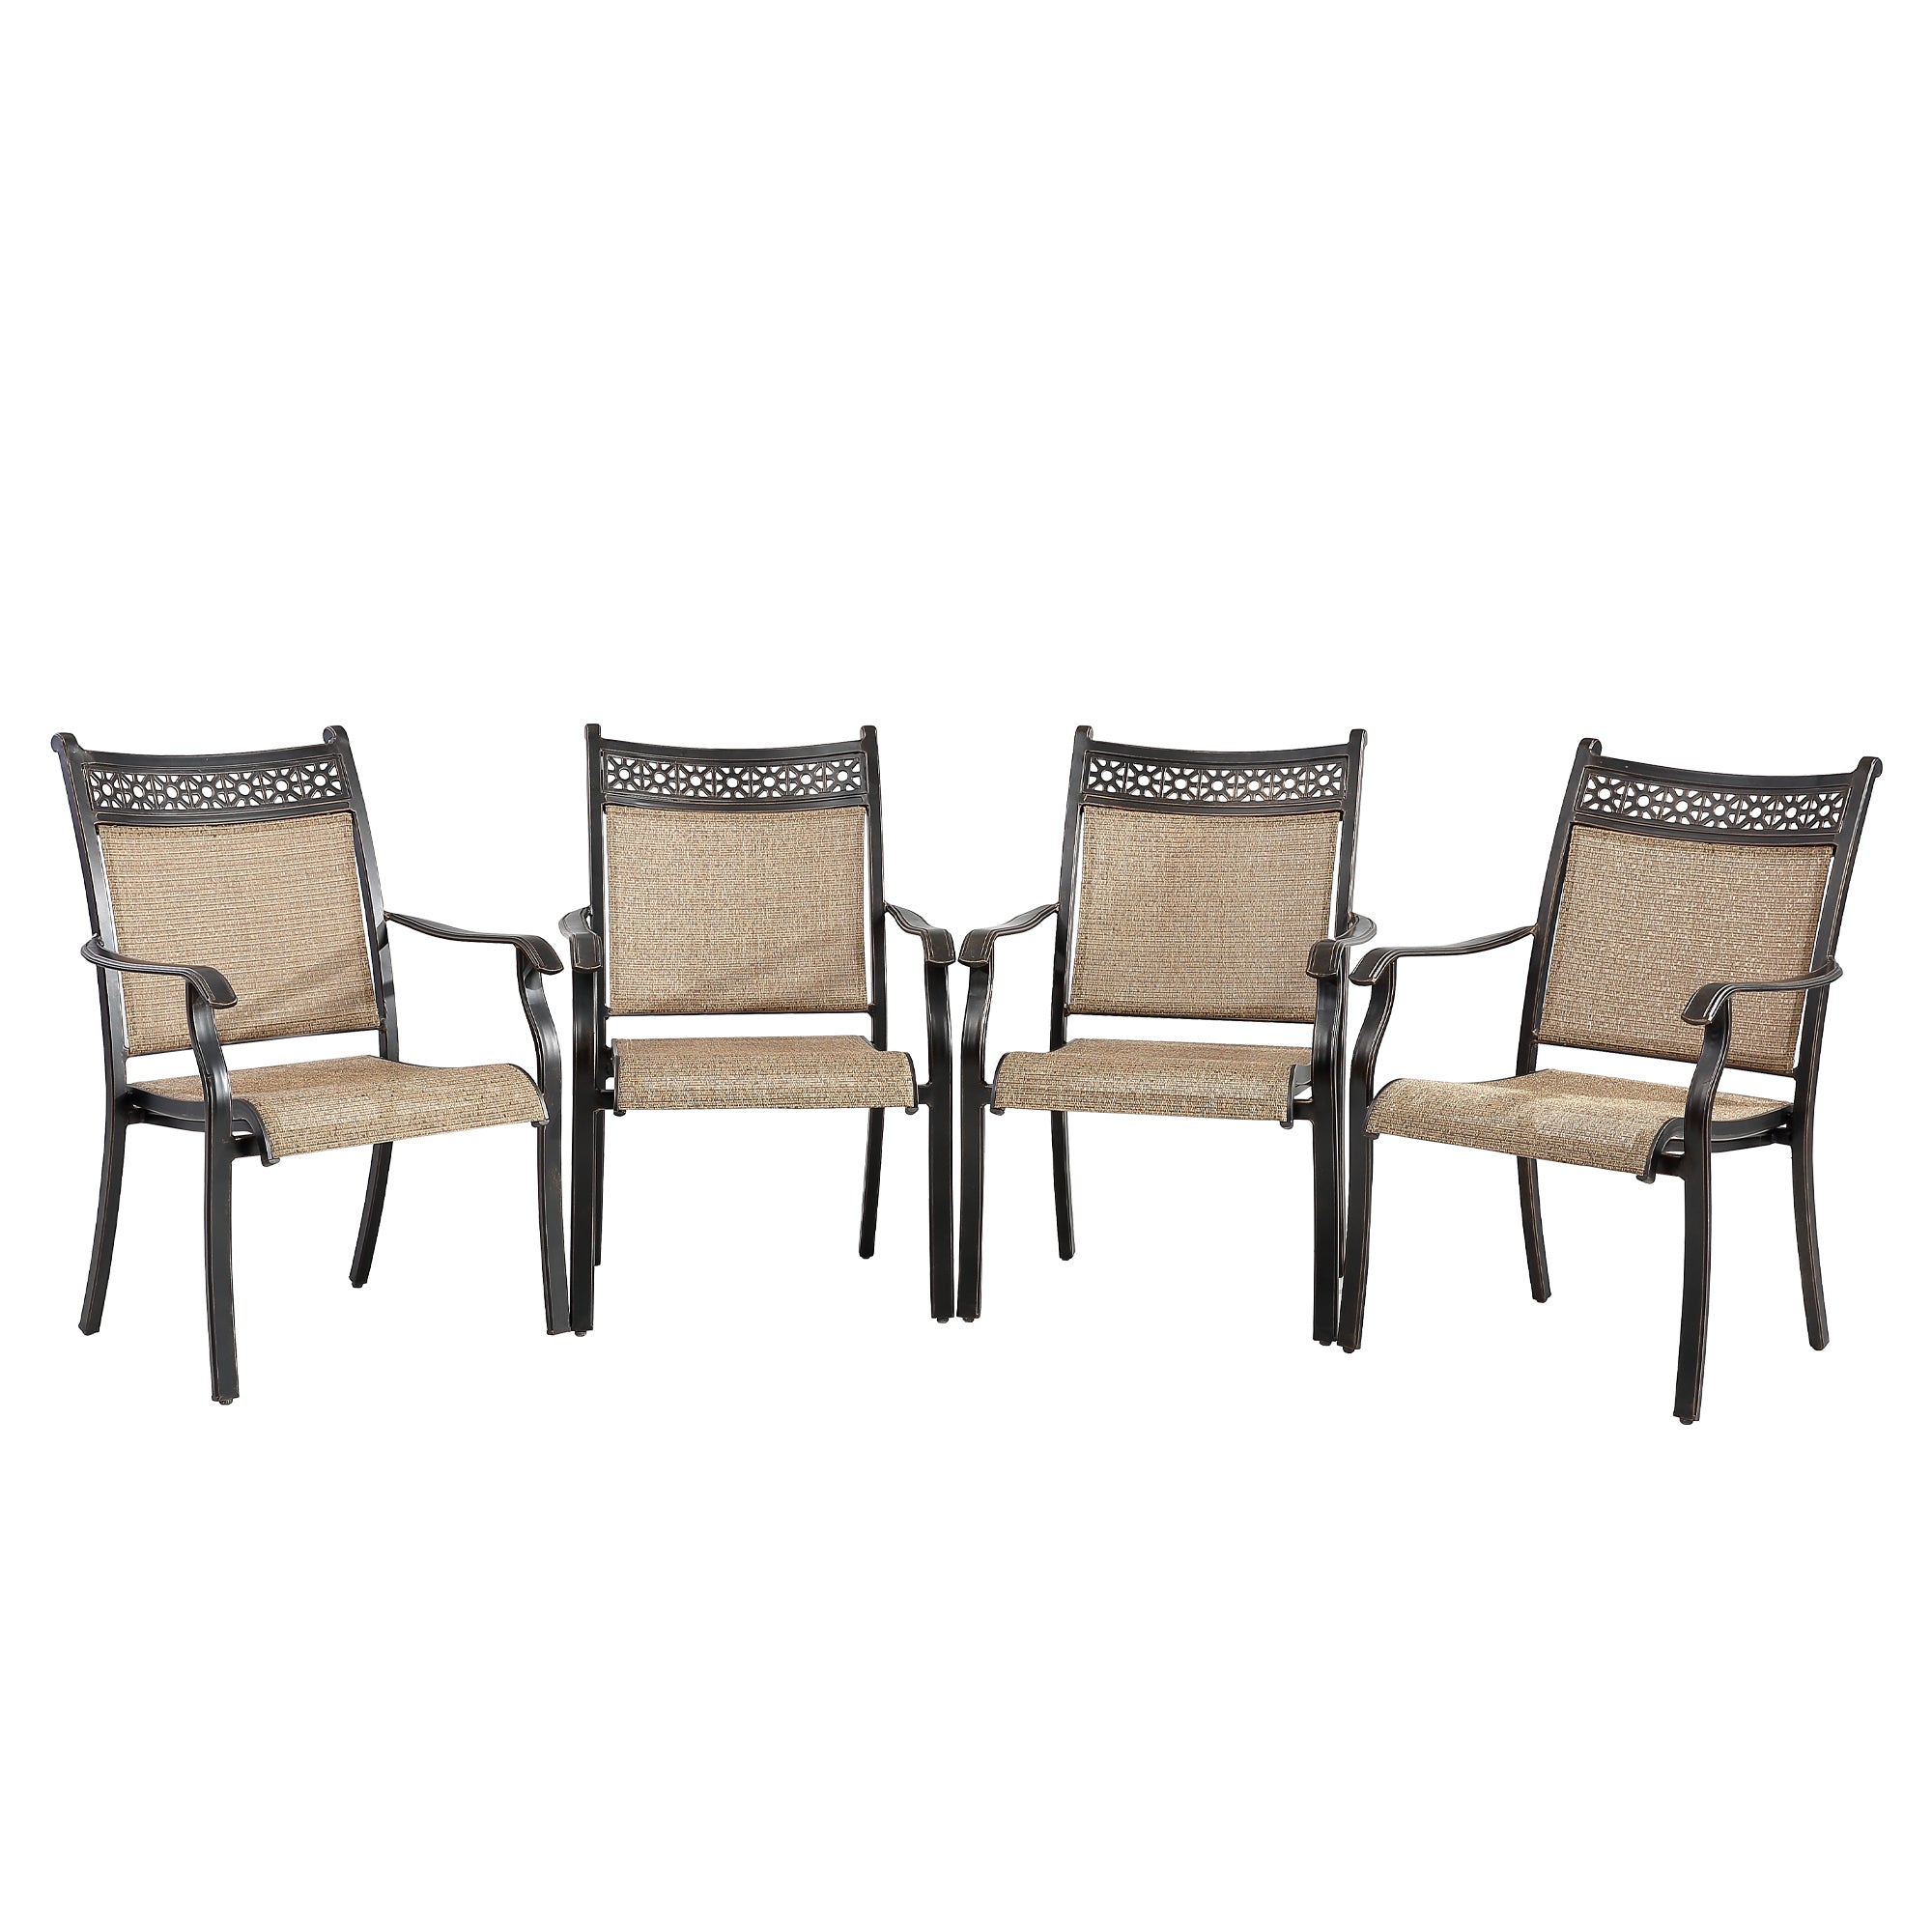 Set of 4 Cast Aluminum Classic Pattern Sling Chairs